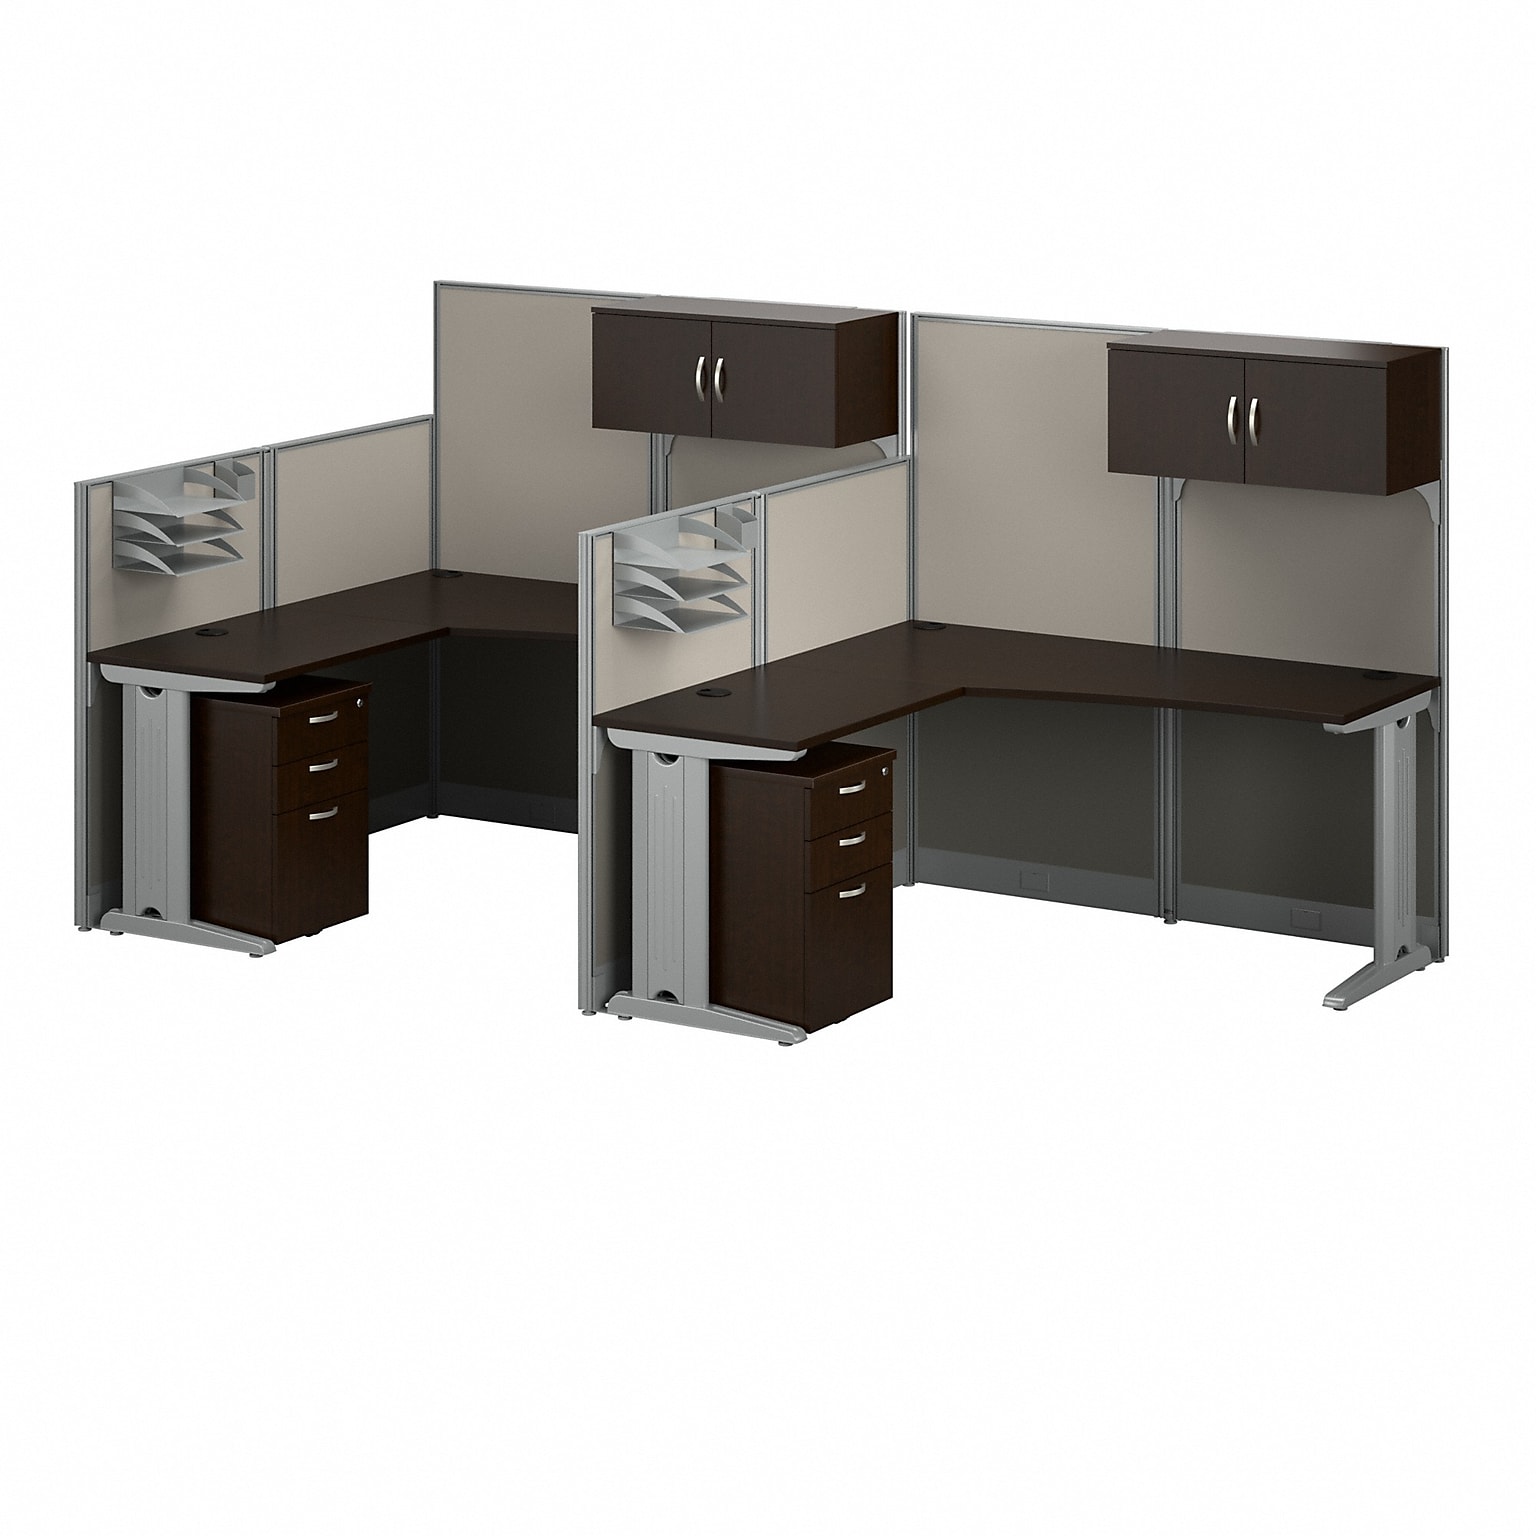 Bush Business Furniture Office in an Hour 63H x 129W 2 Person F-Shaped Cubicle Workstation, Mocha Cherry (OIAH008MR)